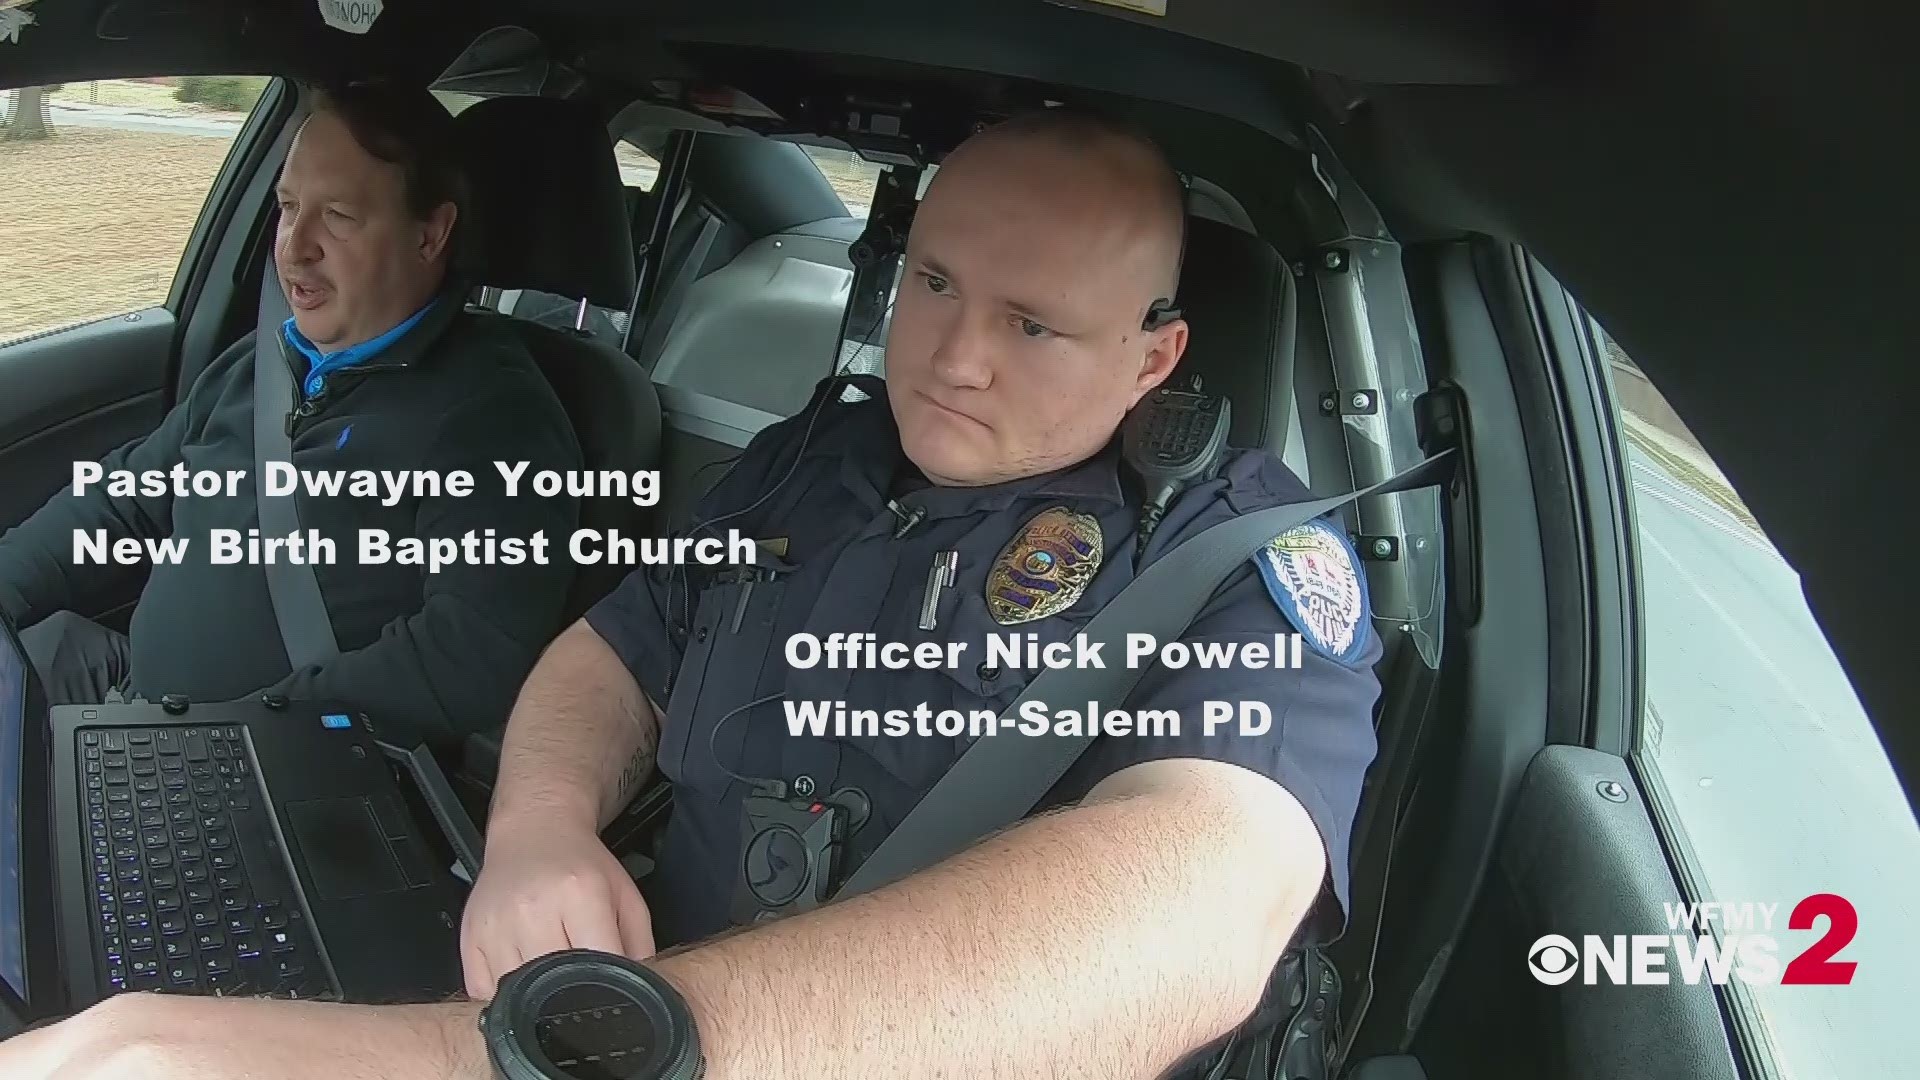 Pastors on Patrol allows religious leaders to relate to police officers. The goal is to change how citizens view law enforcement.